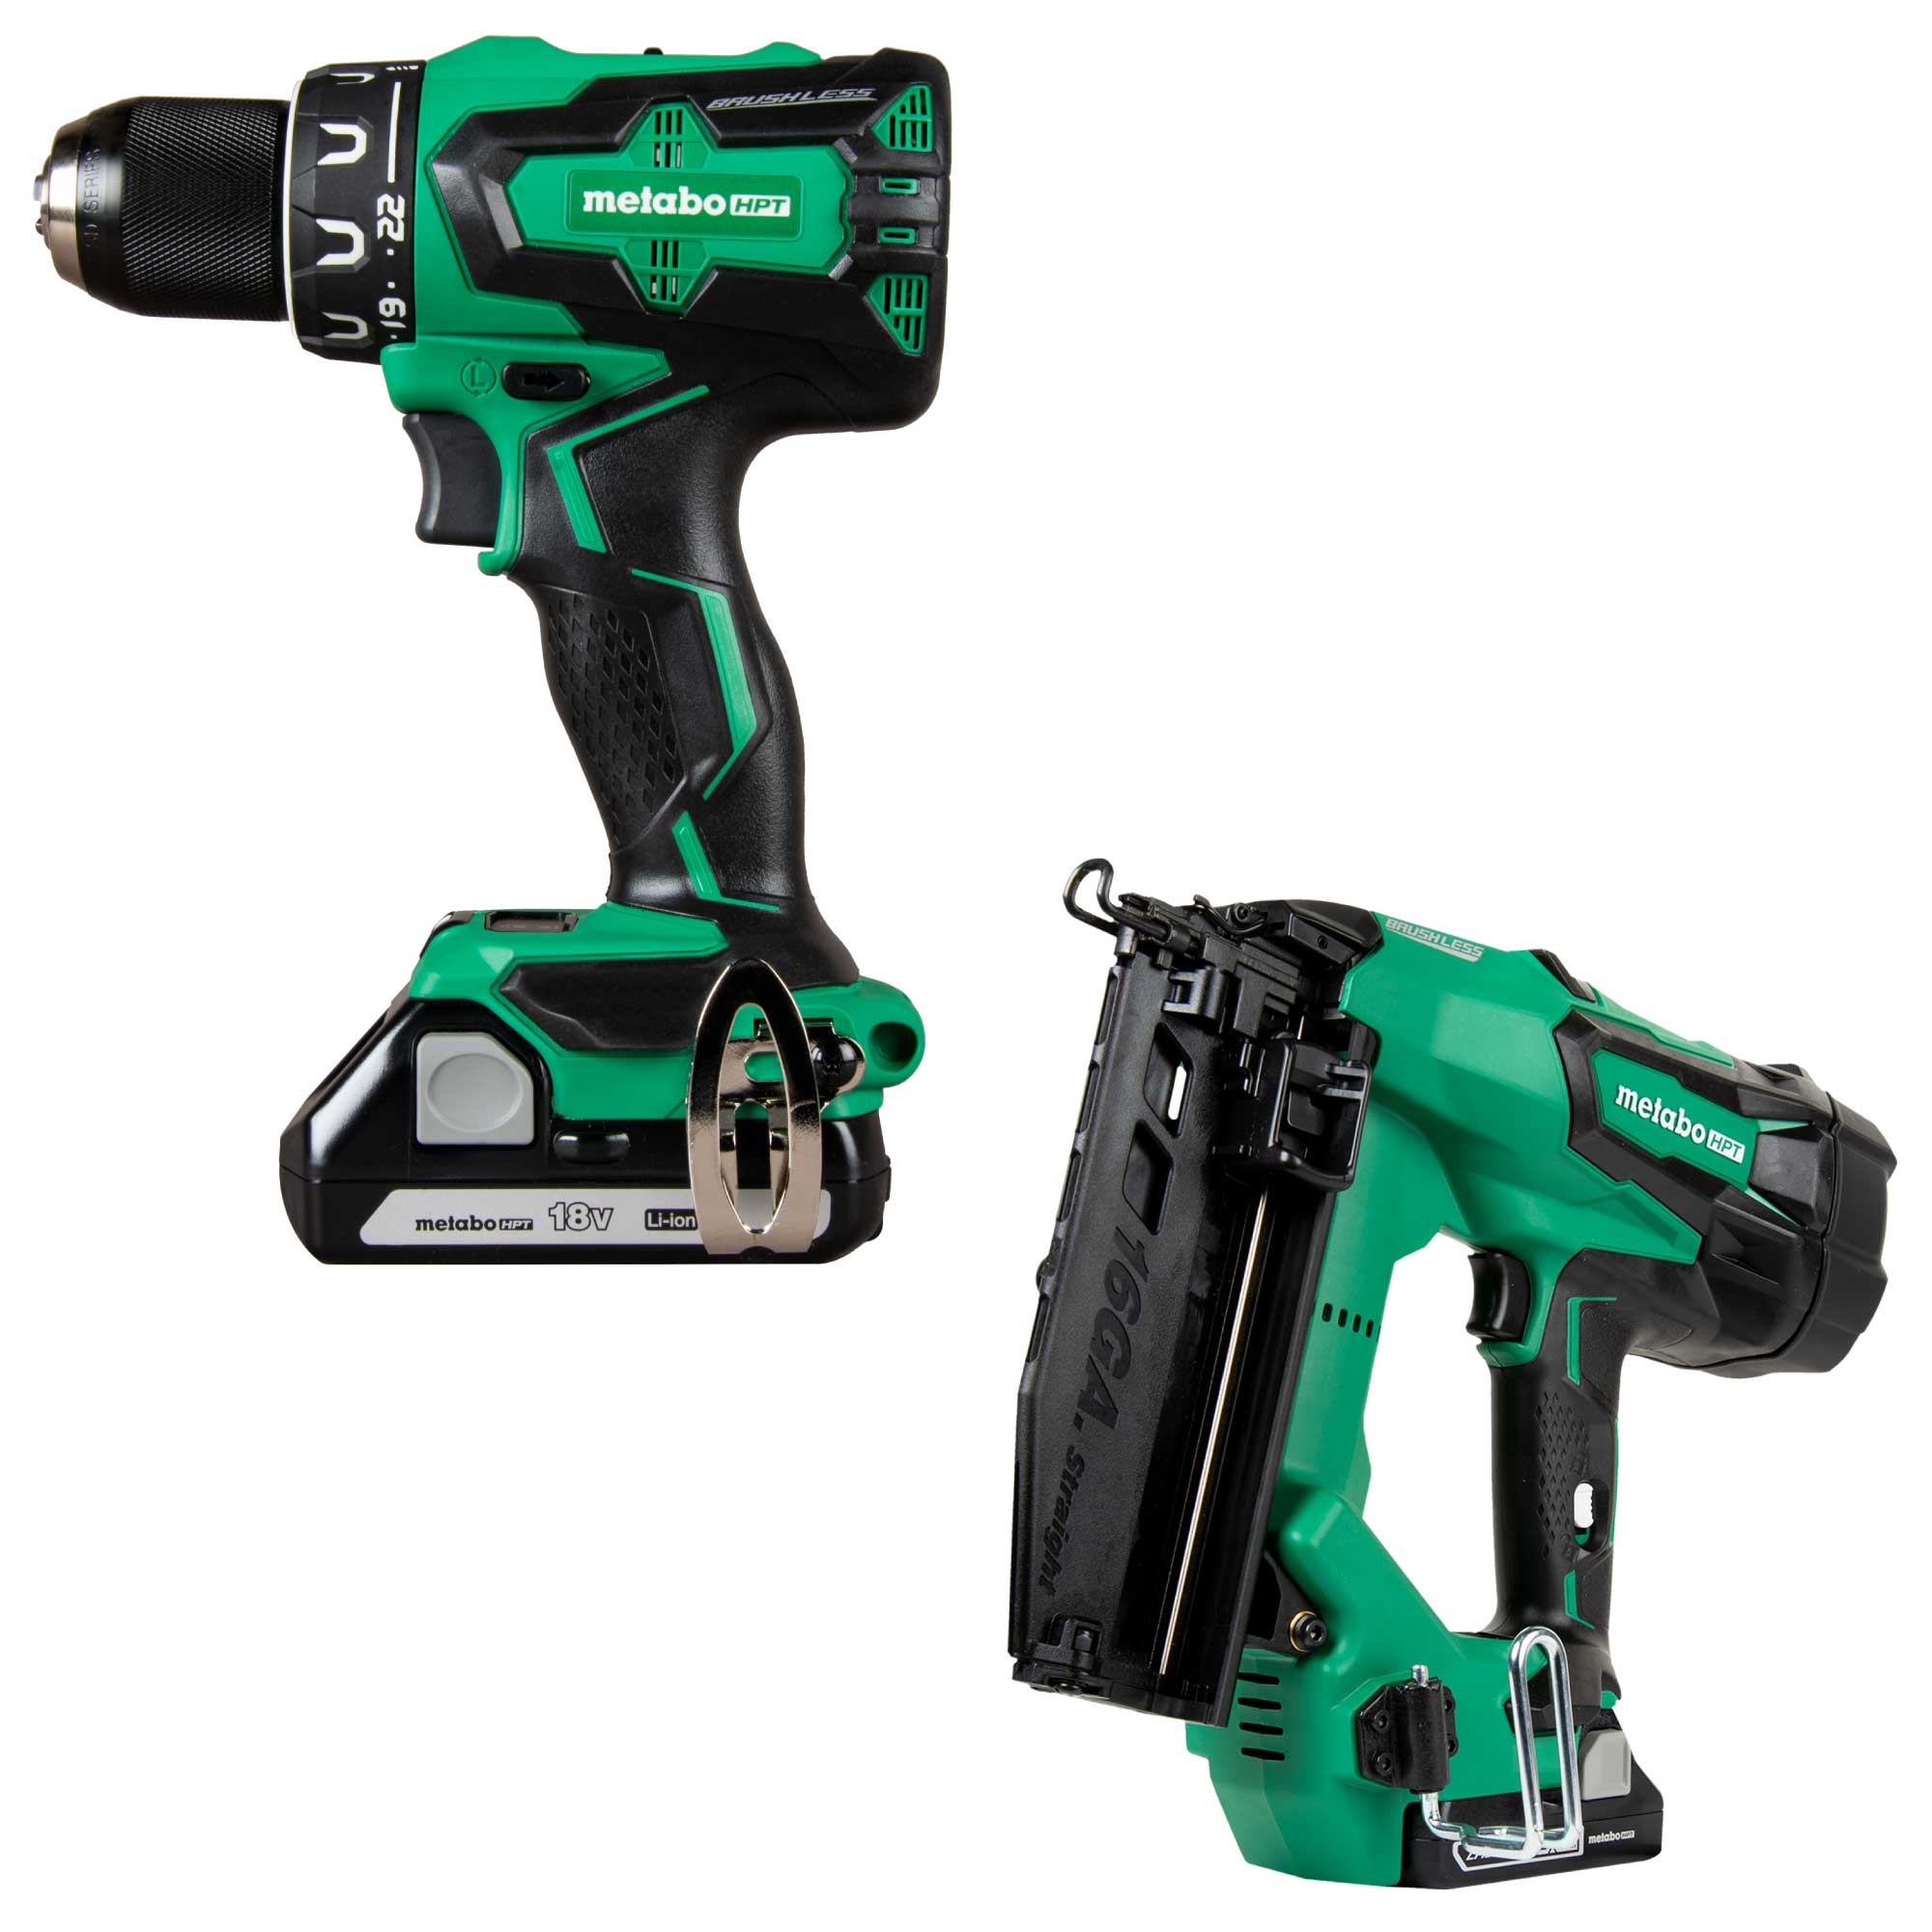 Metabo HPT MultiVolt 18-Volt 1/2-in Brushless Cordless Drill (2-batteries included and charger included) with MultiVolt 18-Volt 16-Gauge Cordless